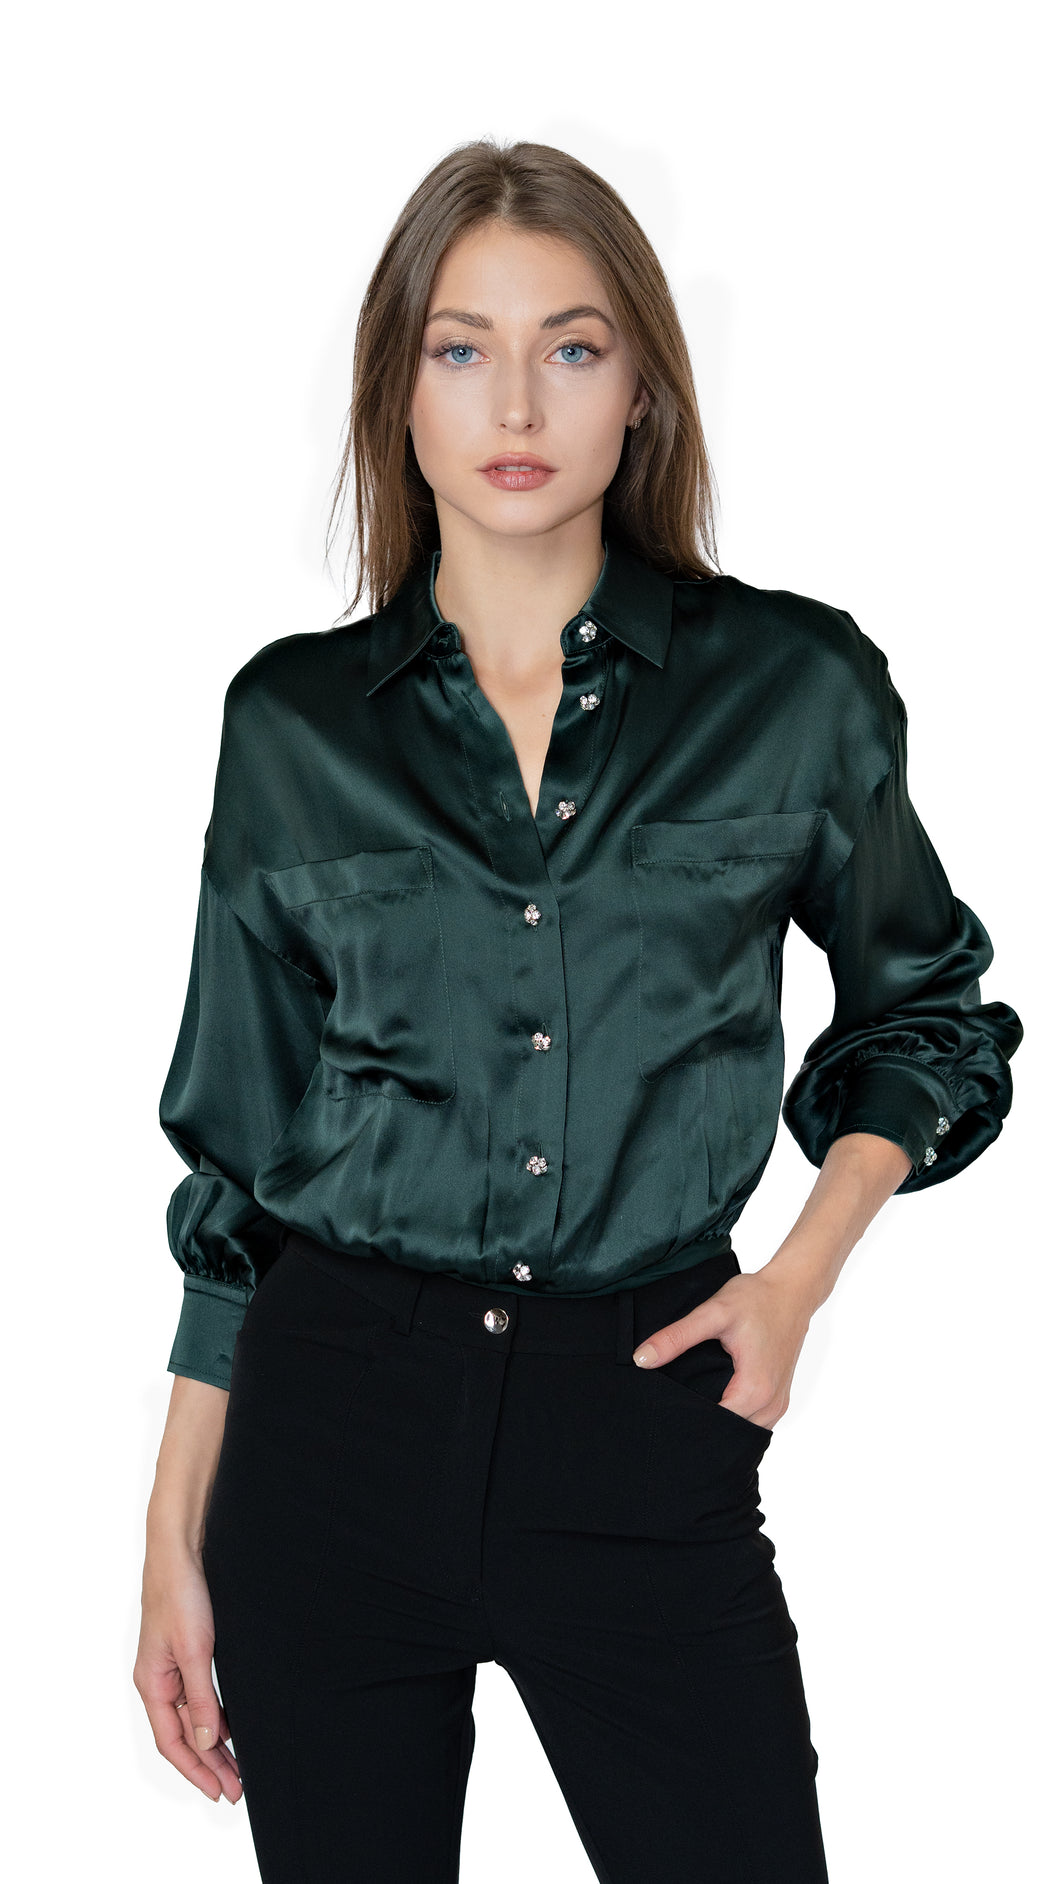 This collared bodysuit is a drop shoulder, long sleeved silhouette, featuring a functional center-front placket with crystal buttons.  The Belkis Charmeuse Bodysuit is finished with functional wrist-cuffs and front patch pockets.